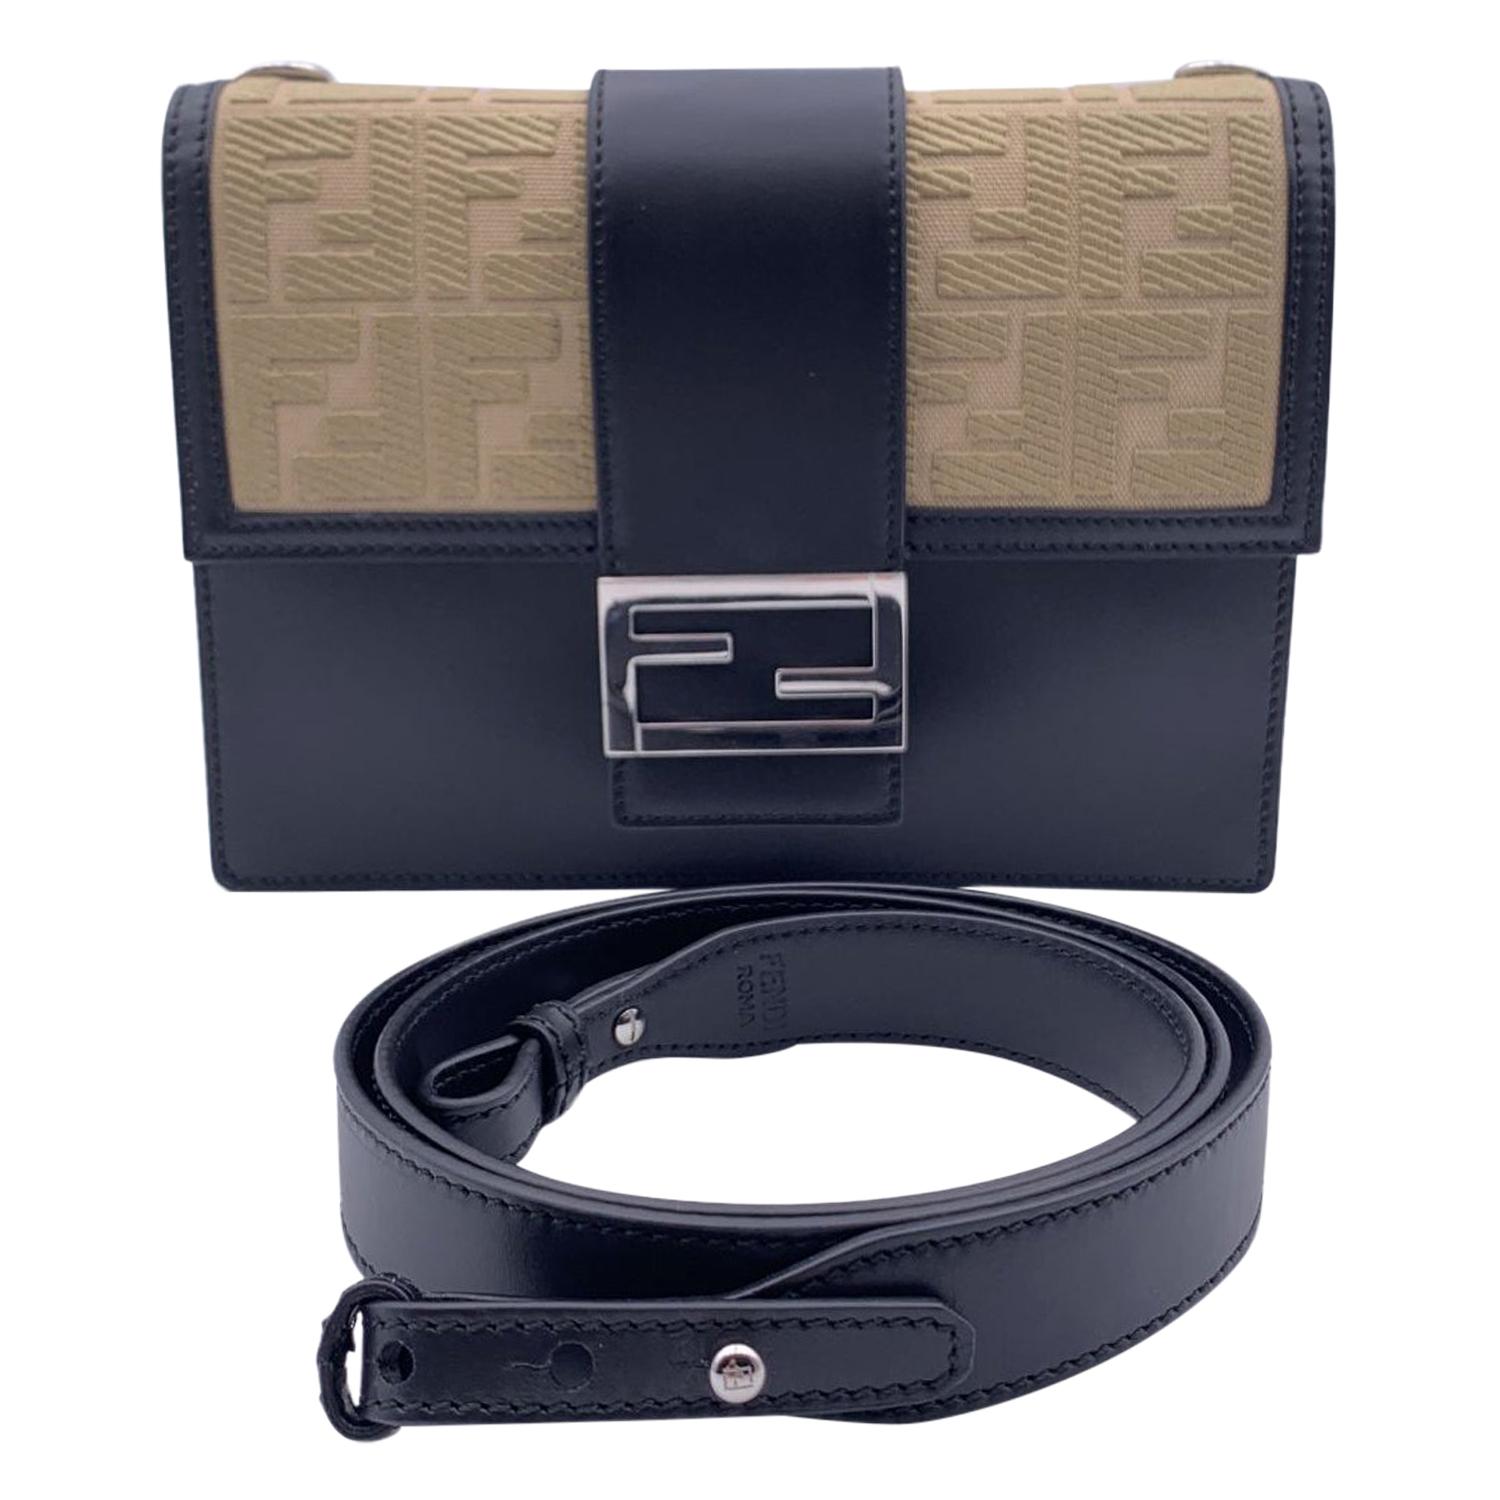 Fendi Leather Flat Pouch in Gray for Men